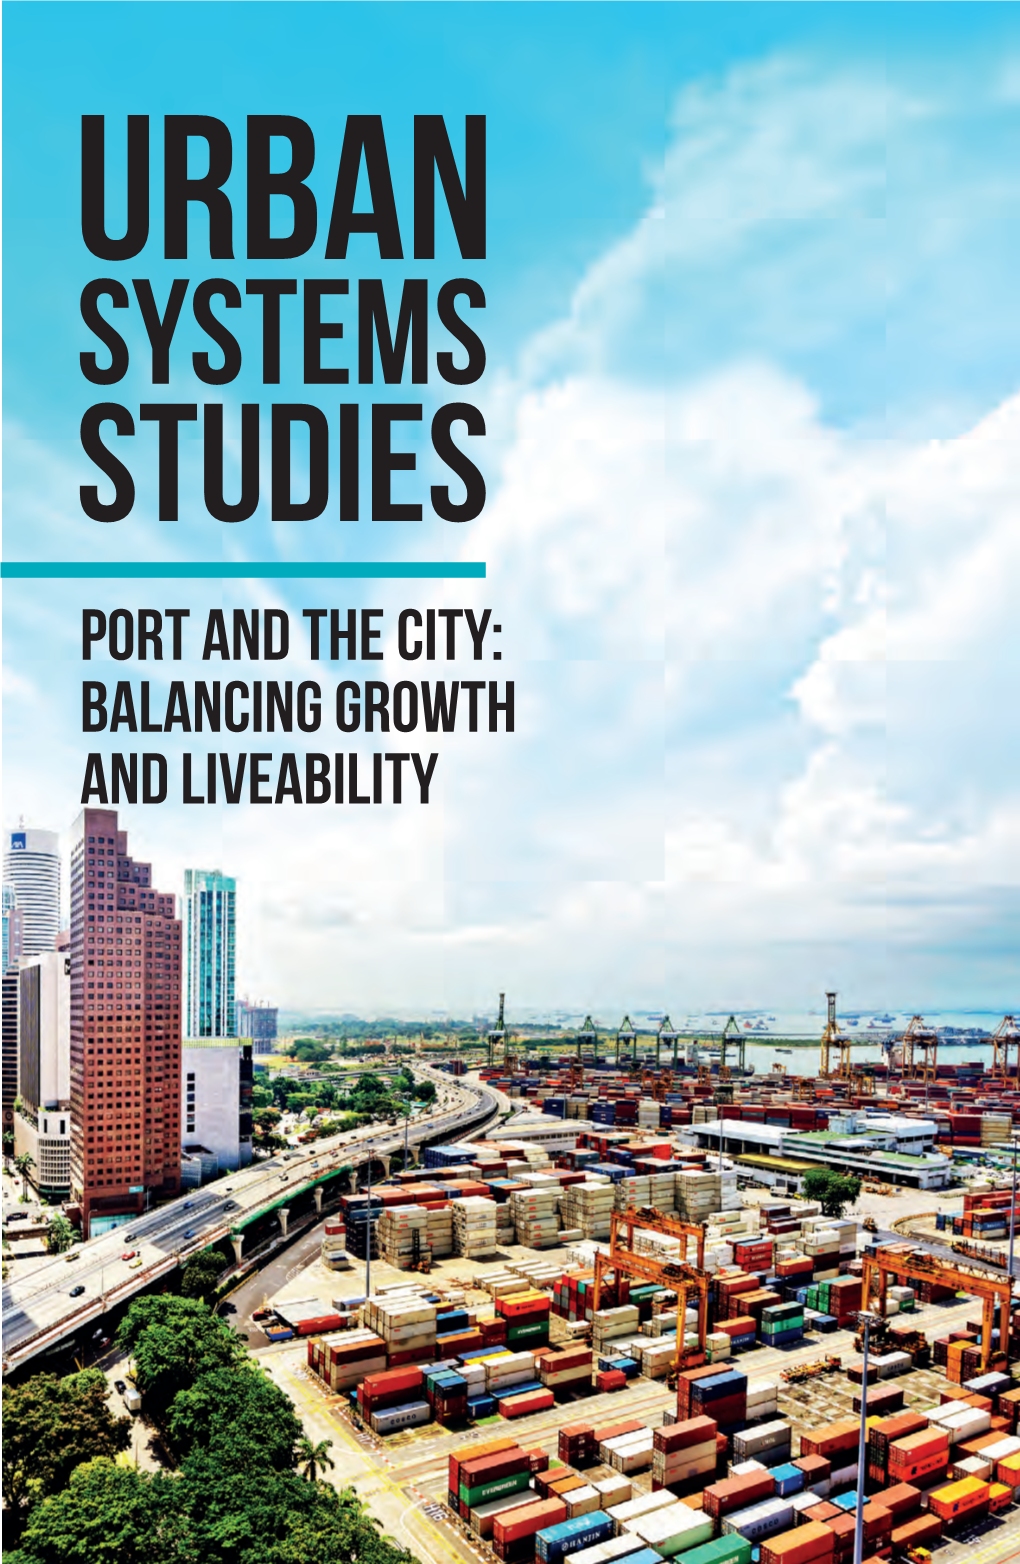 Port and the City: Balancing Growth and Liveability